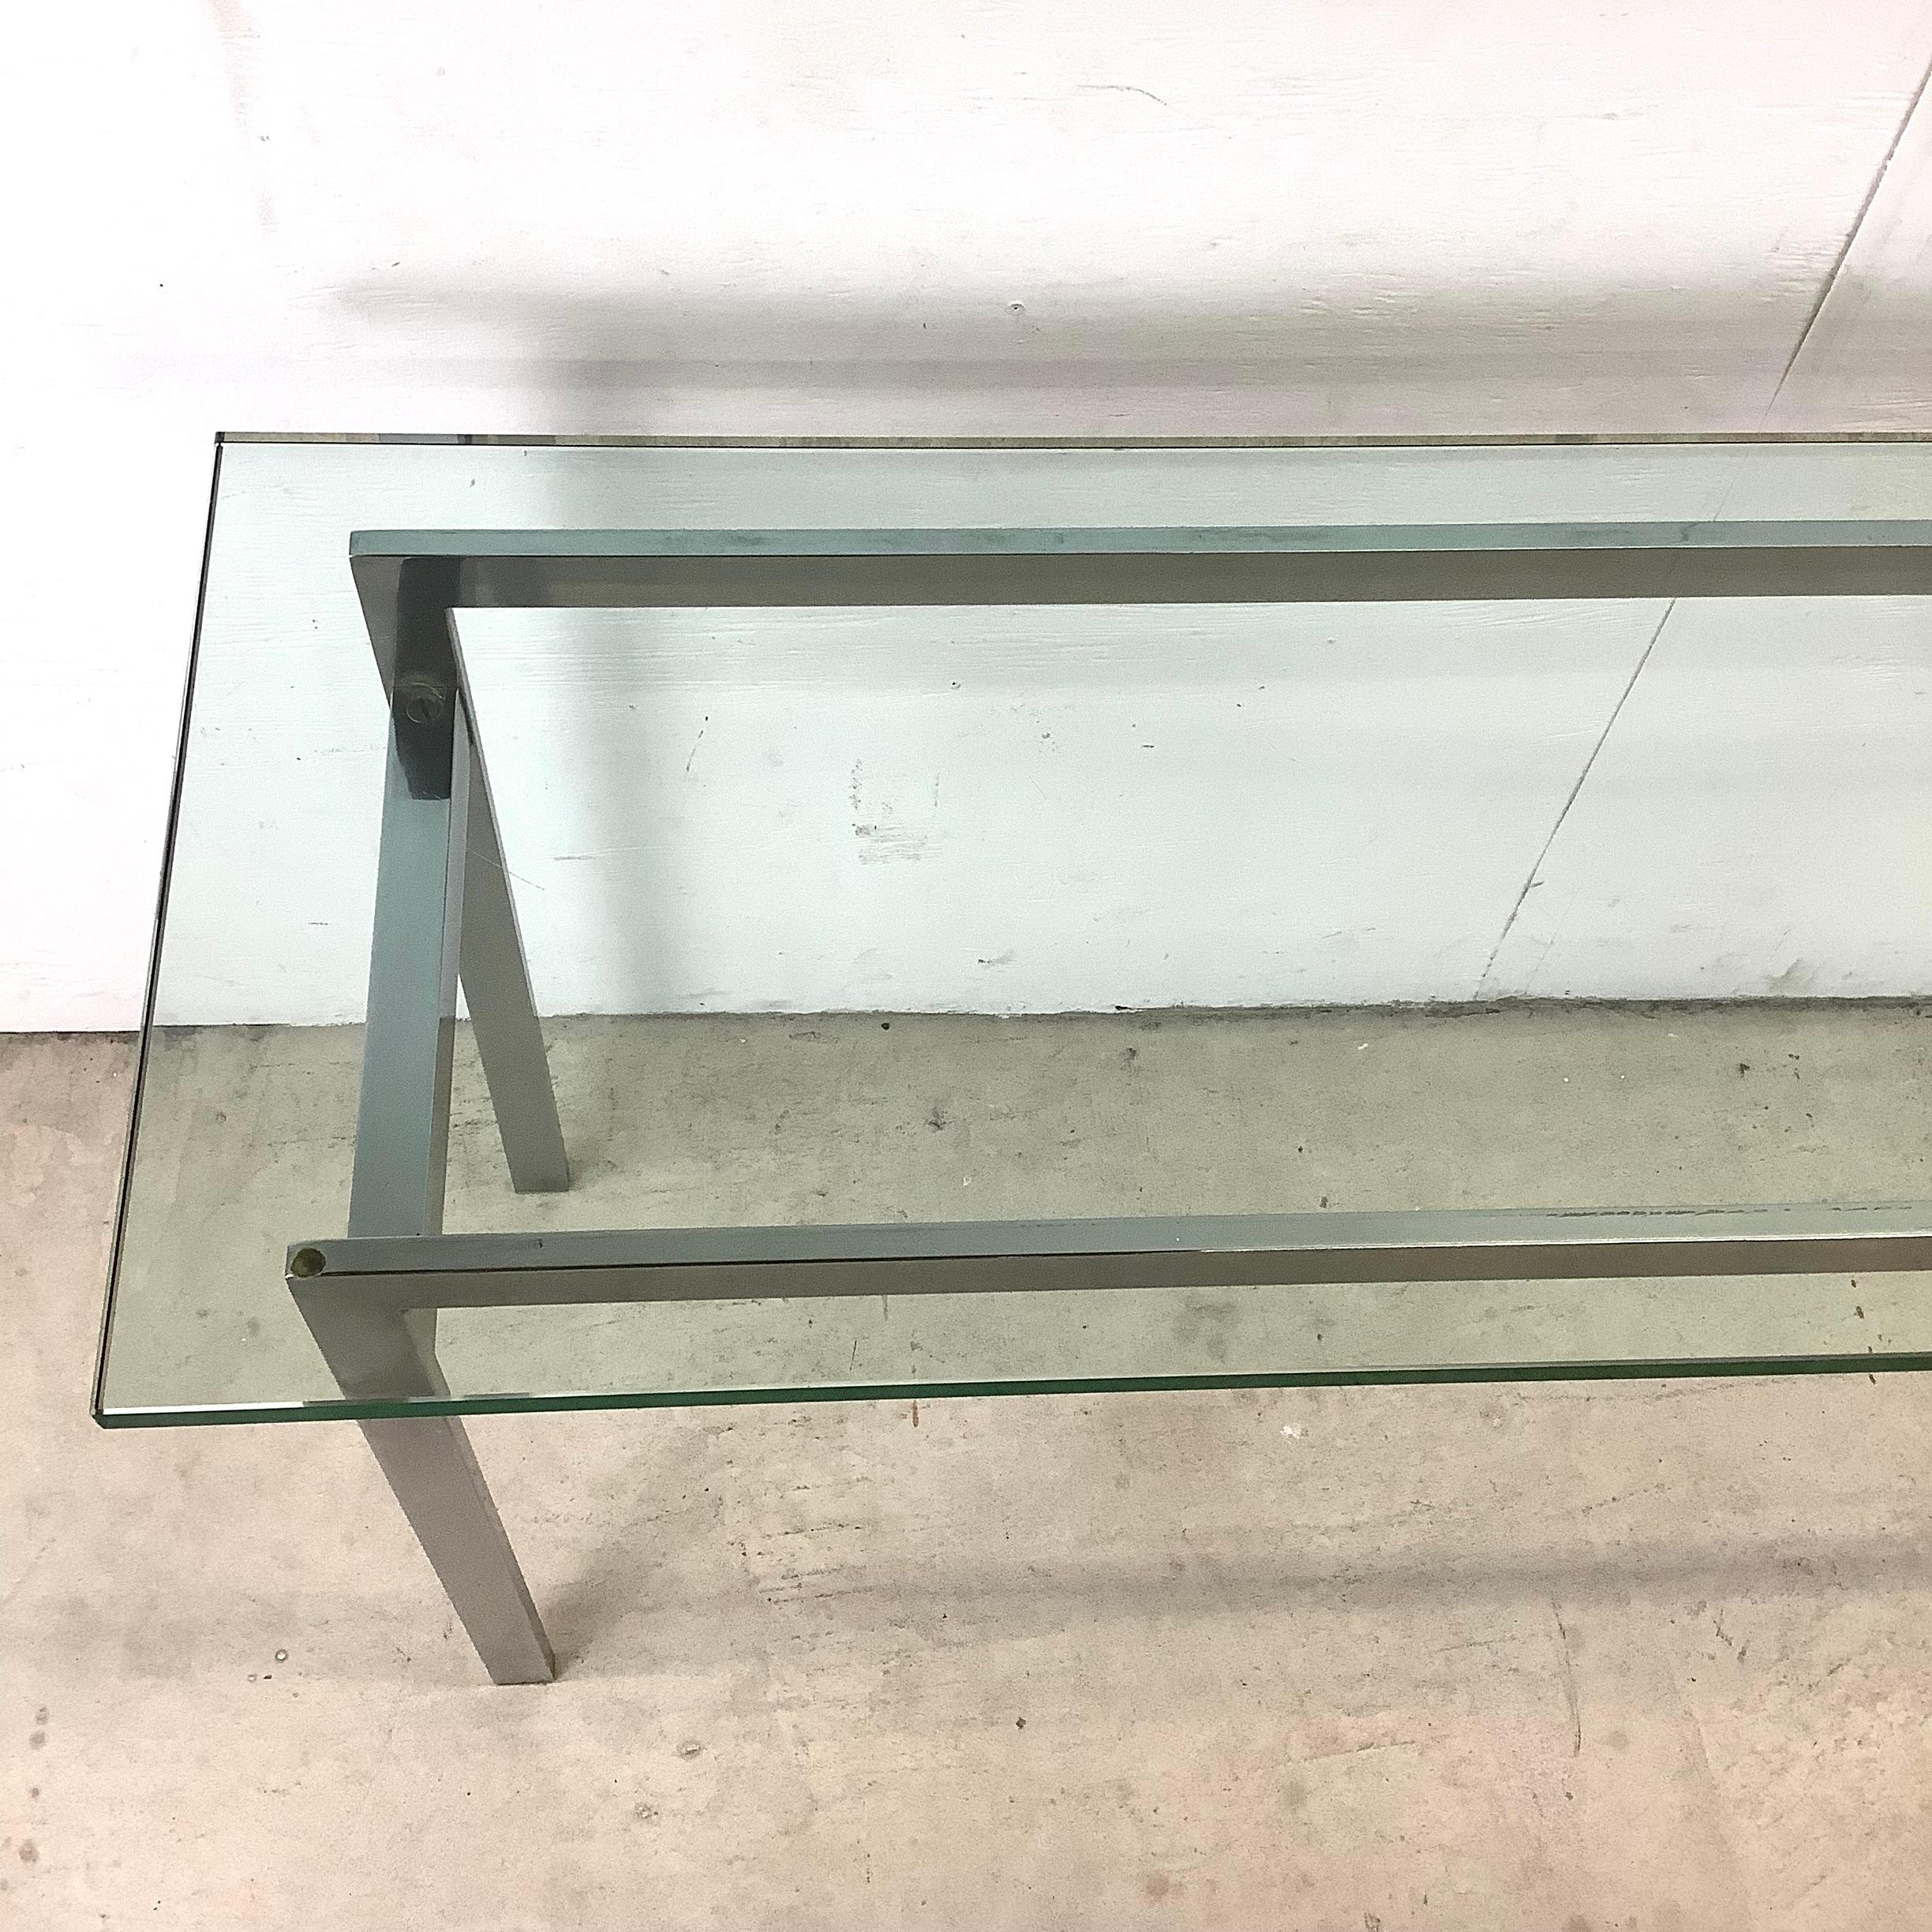 This mid-century console table features elegant milo baughman style design in a simple yet stunning combination including heavy polished steel frame and thick glass top. Perfect table for entryway display, sofa table, or any other space in need of a